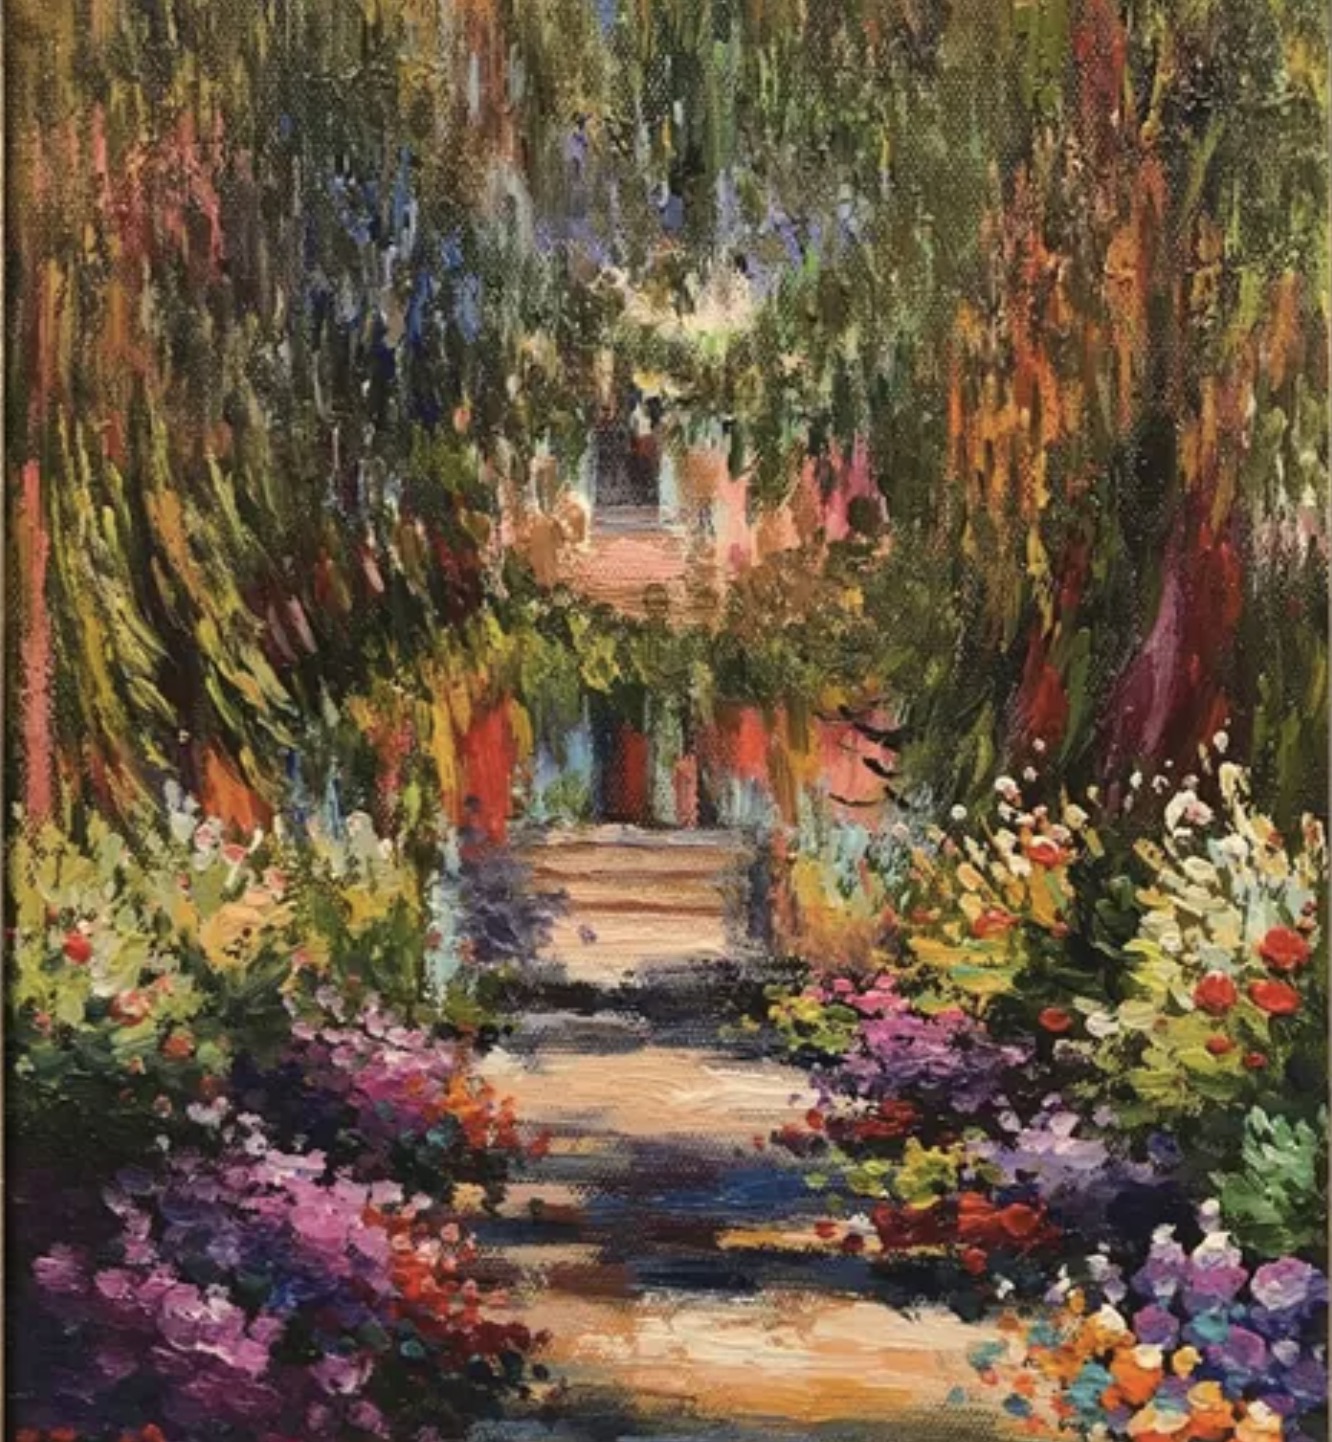 Claude Monet "Garden Path at Giverny, 1902" Oil Painting, After - Image 5 of 6